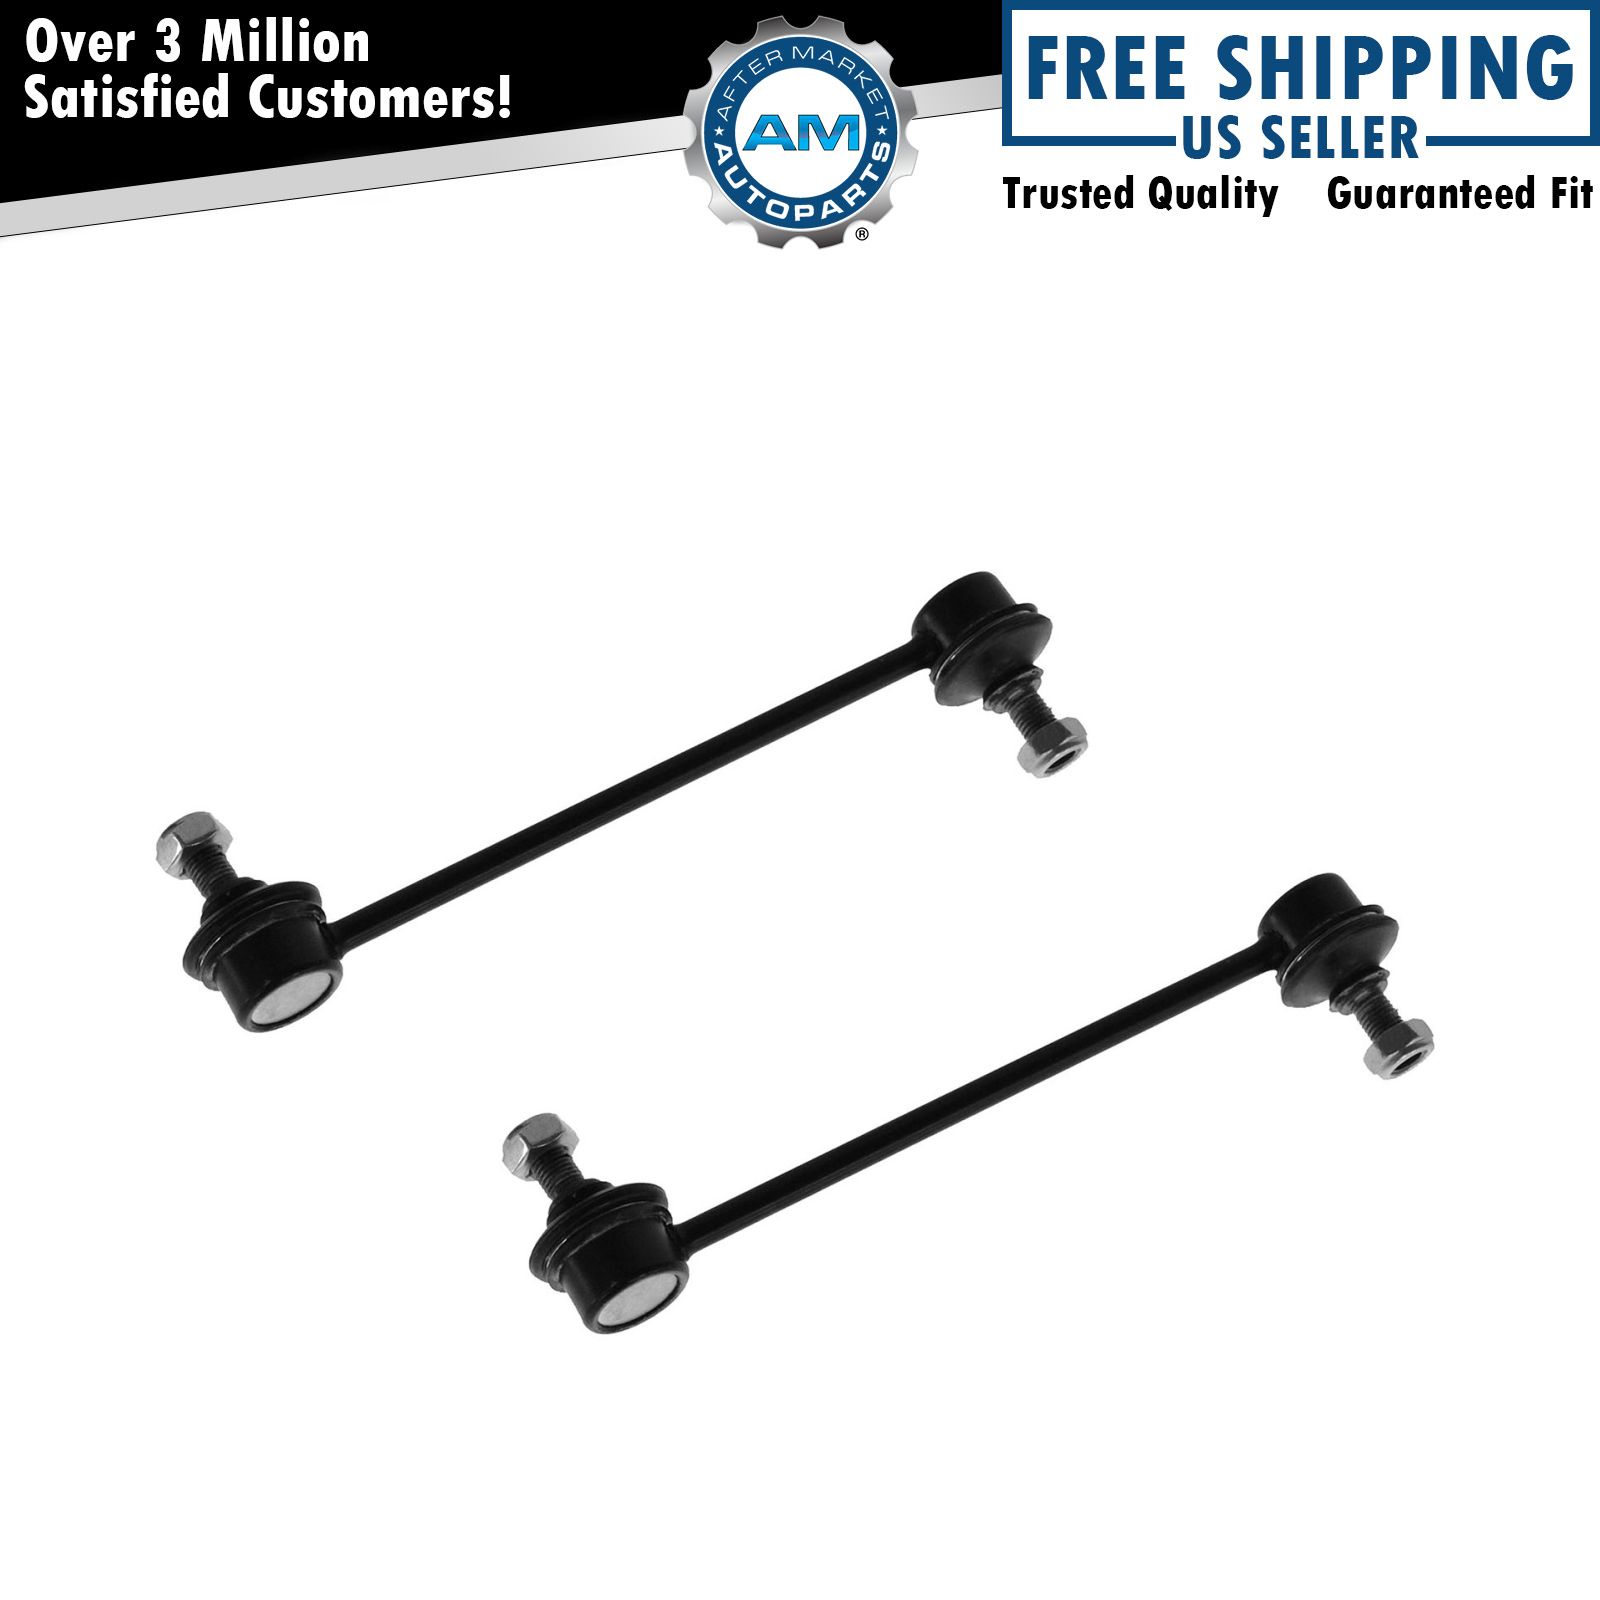 Sway Bar End Link Rear Left Right LH RH Pair Set of 2 for Toyota Lexus Saturn